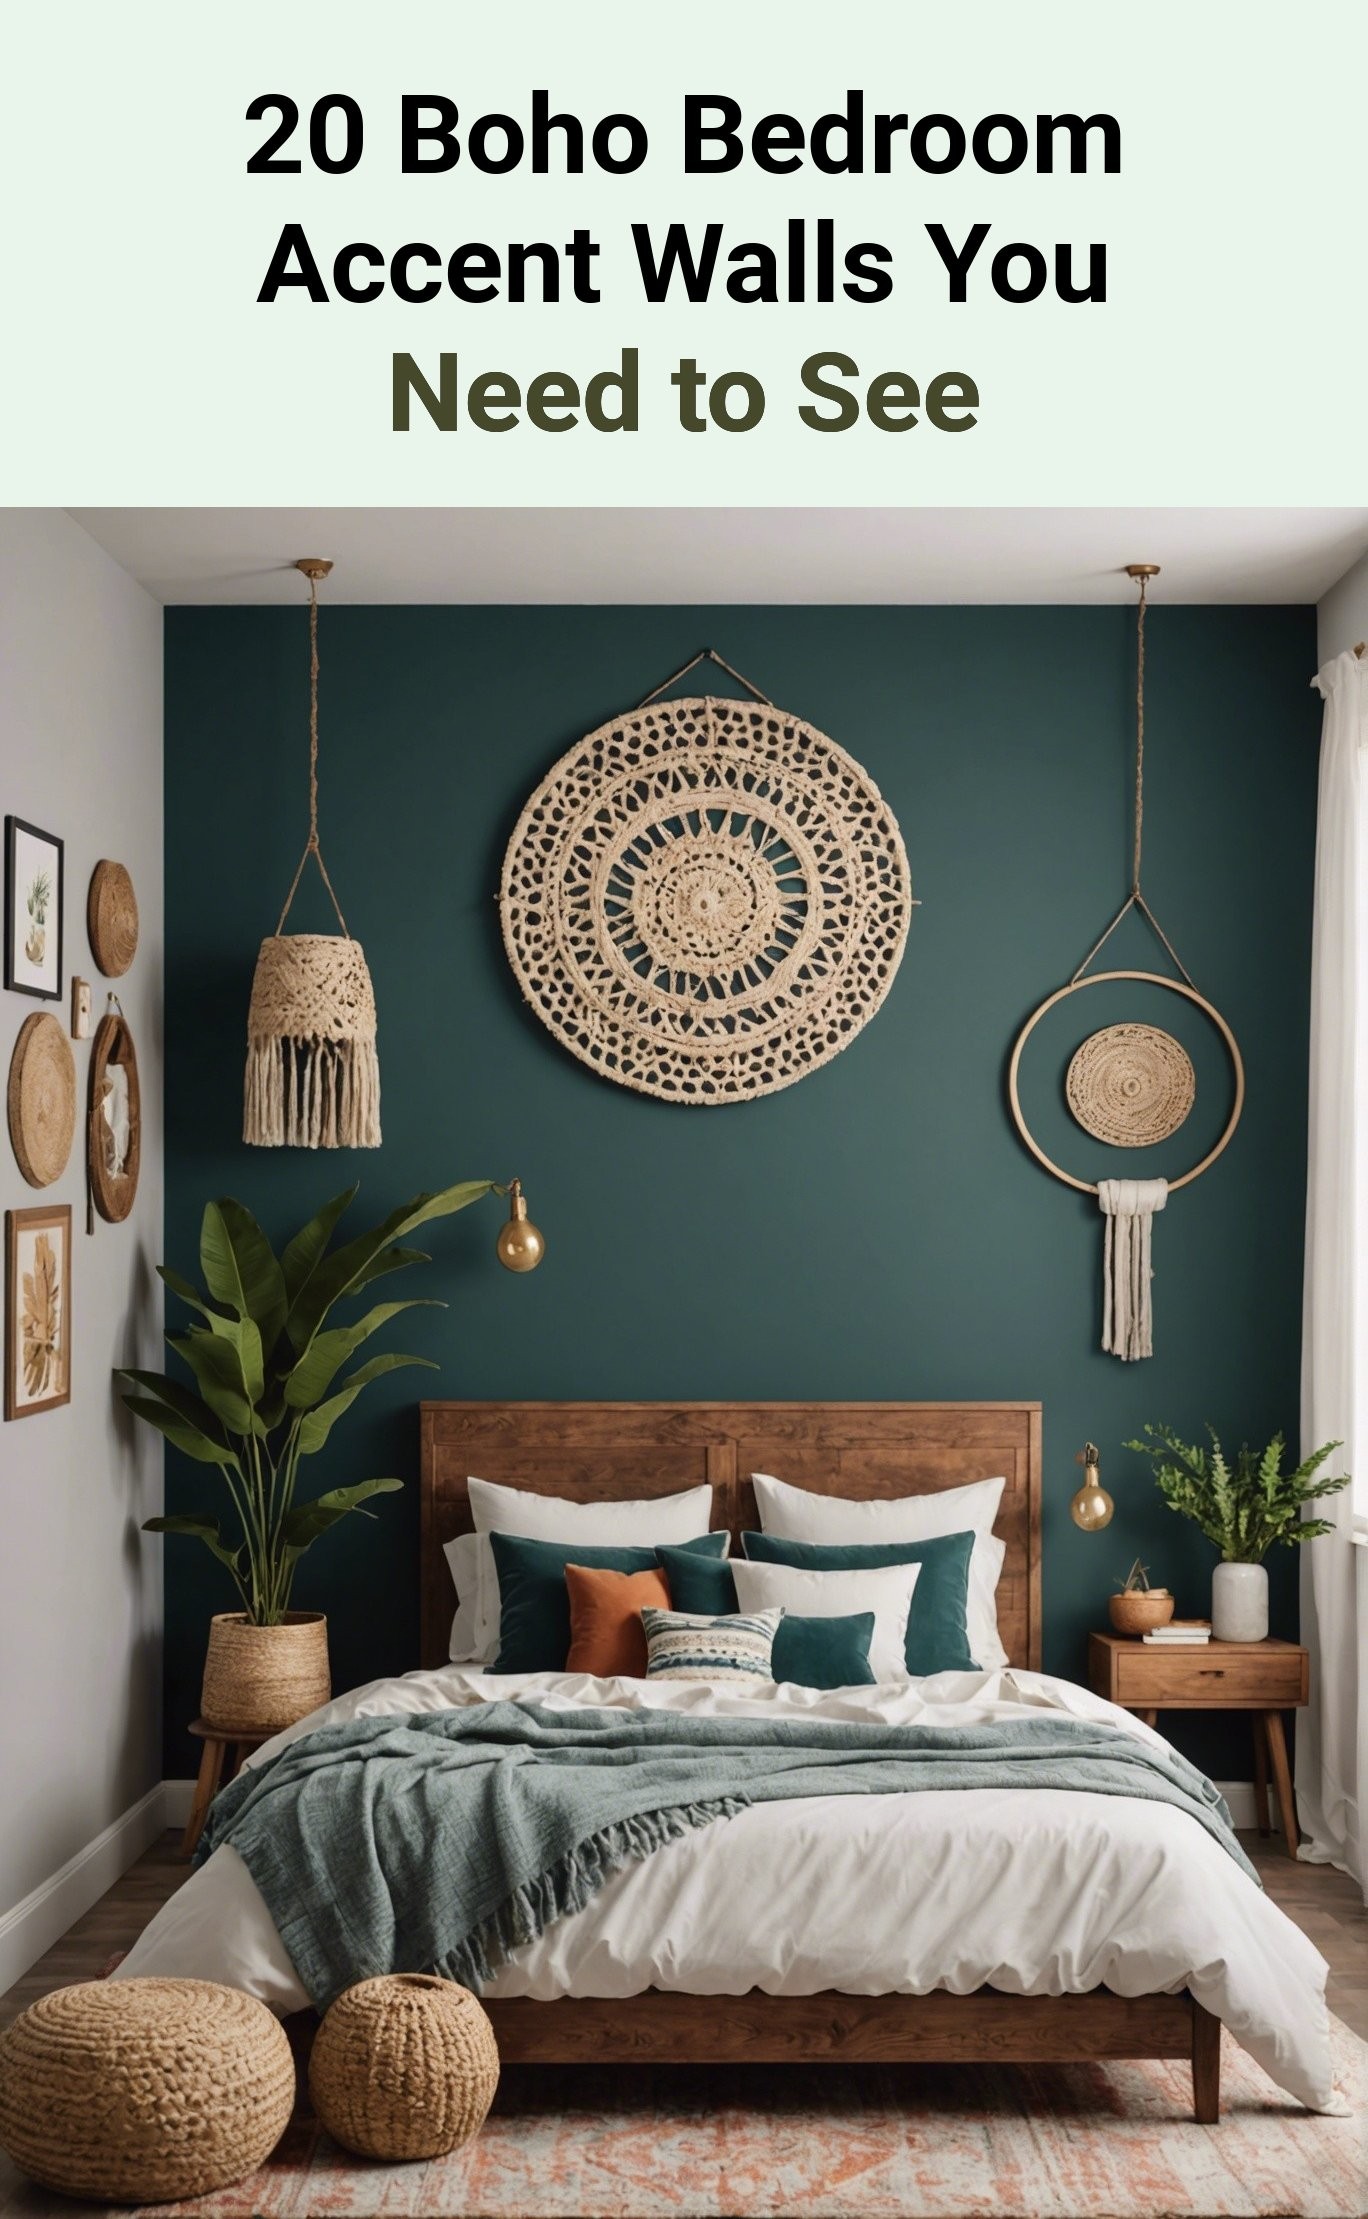 20 Boho Bedroom Accent Walls You Need to See